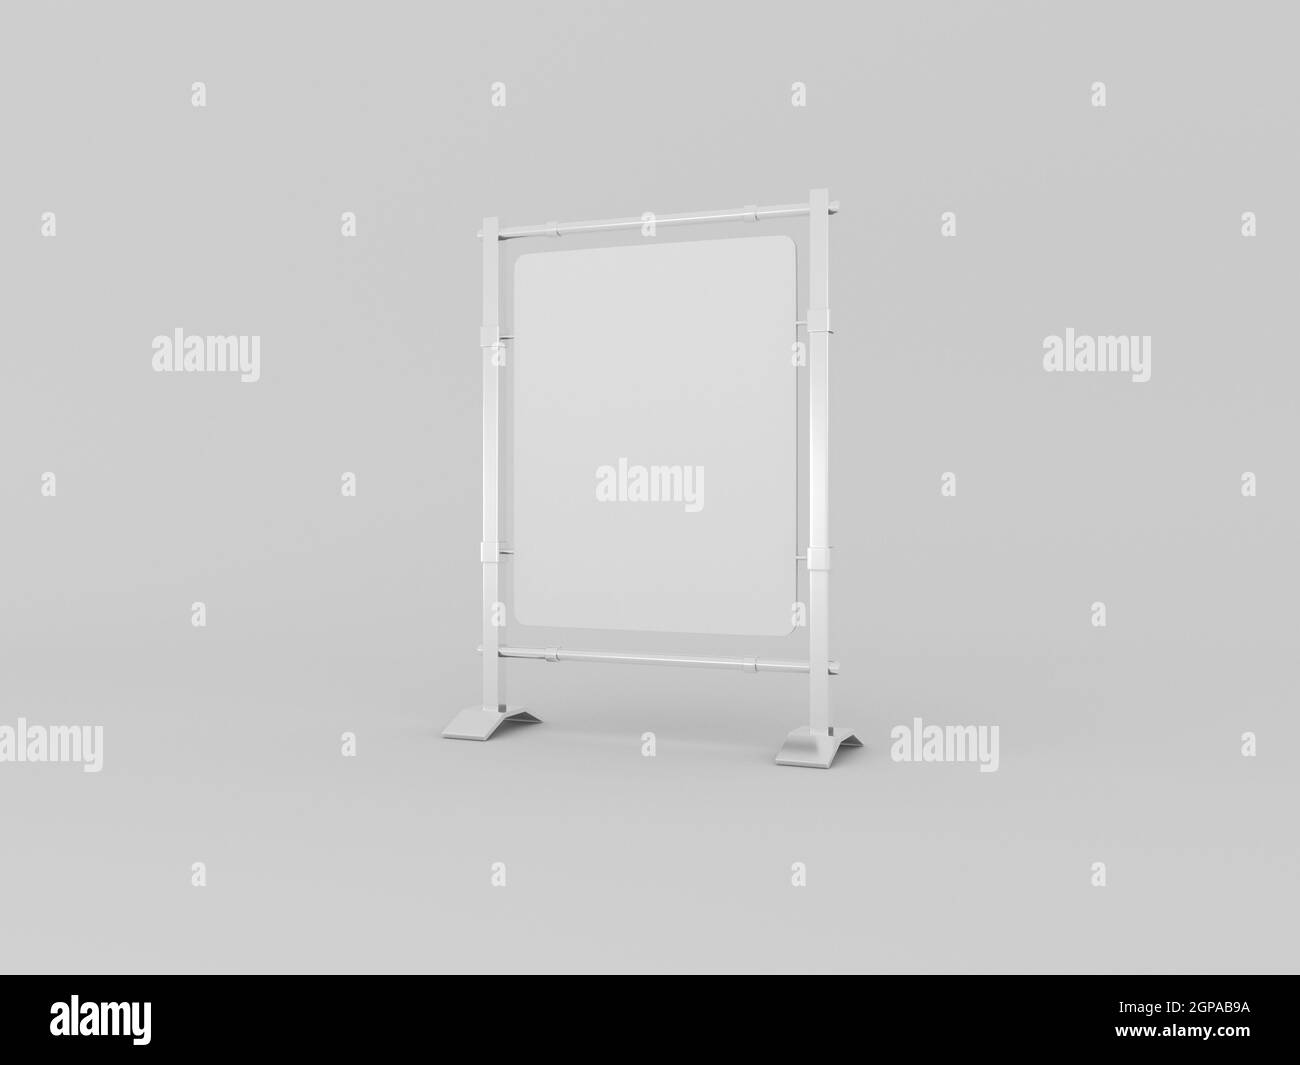 Outdoor advertising stand sandwich board mock up template 3D rendered illustration. Realistic Standee signage board. Stock Photo